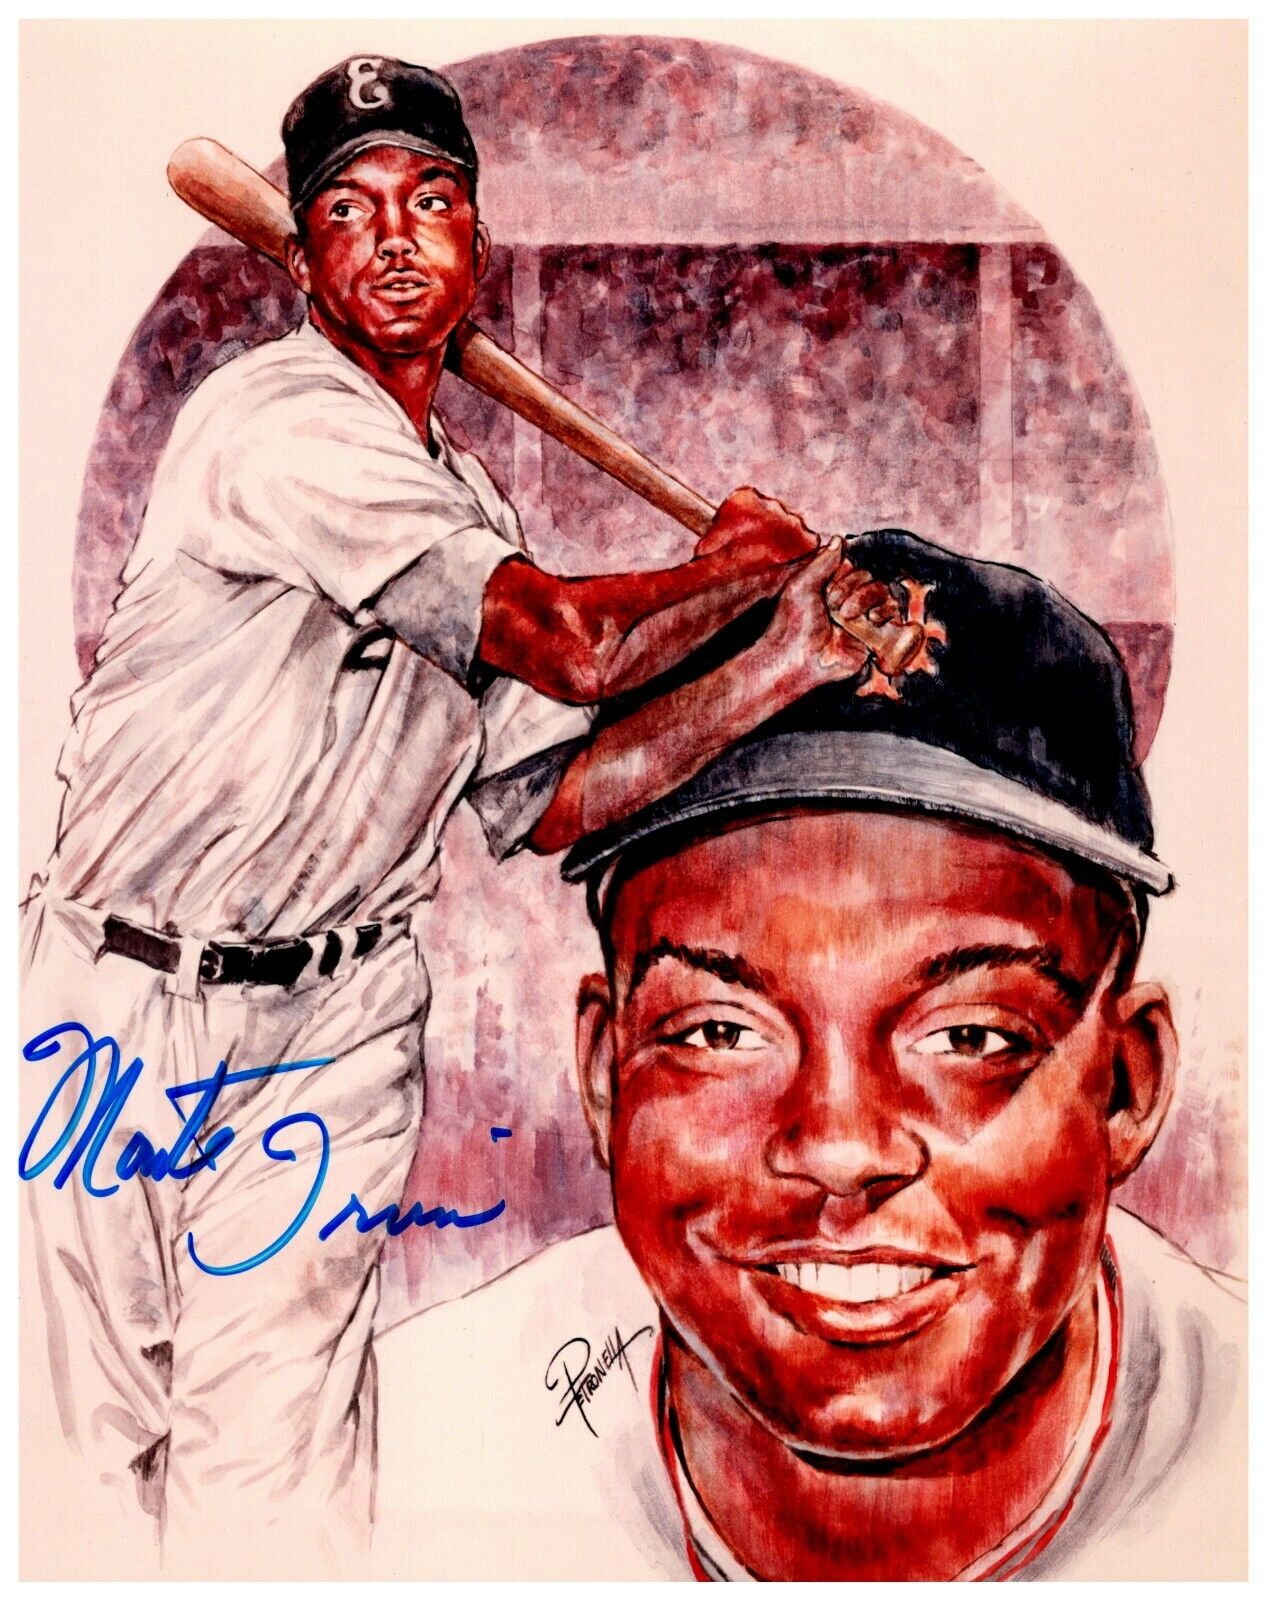 Monte Irvin New York Giants MLB Signed Autographed 8x10 Color Photo D